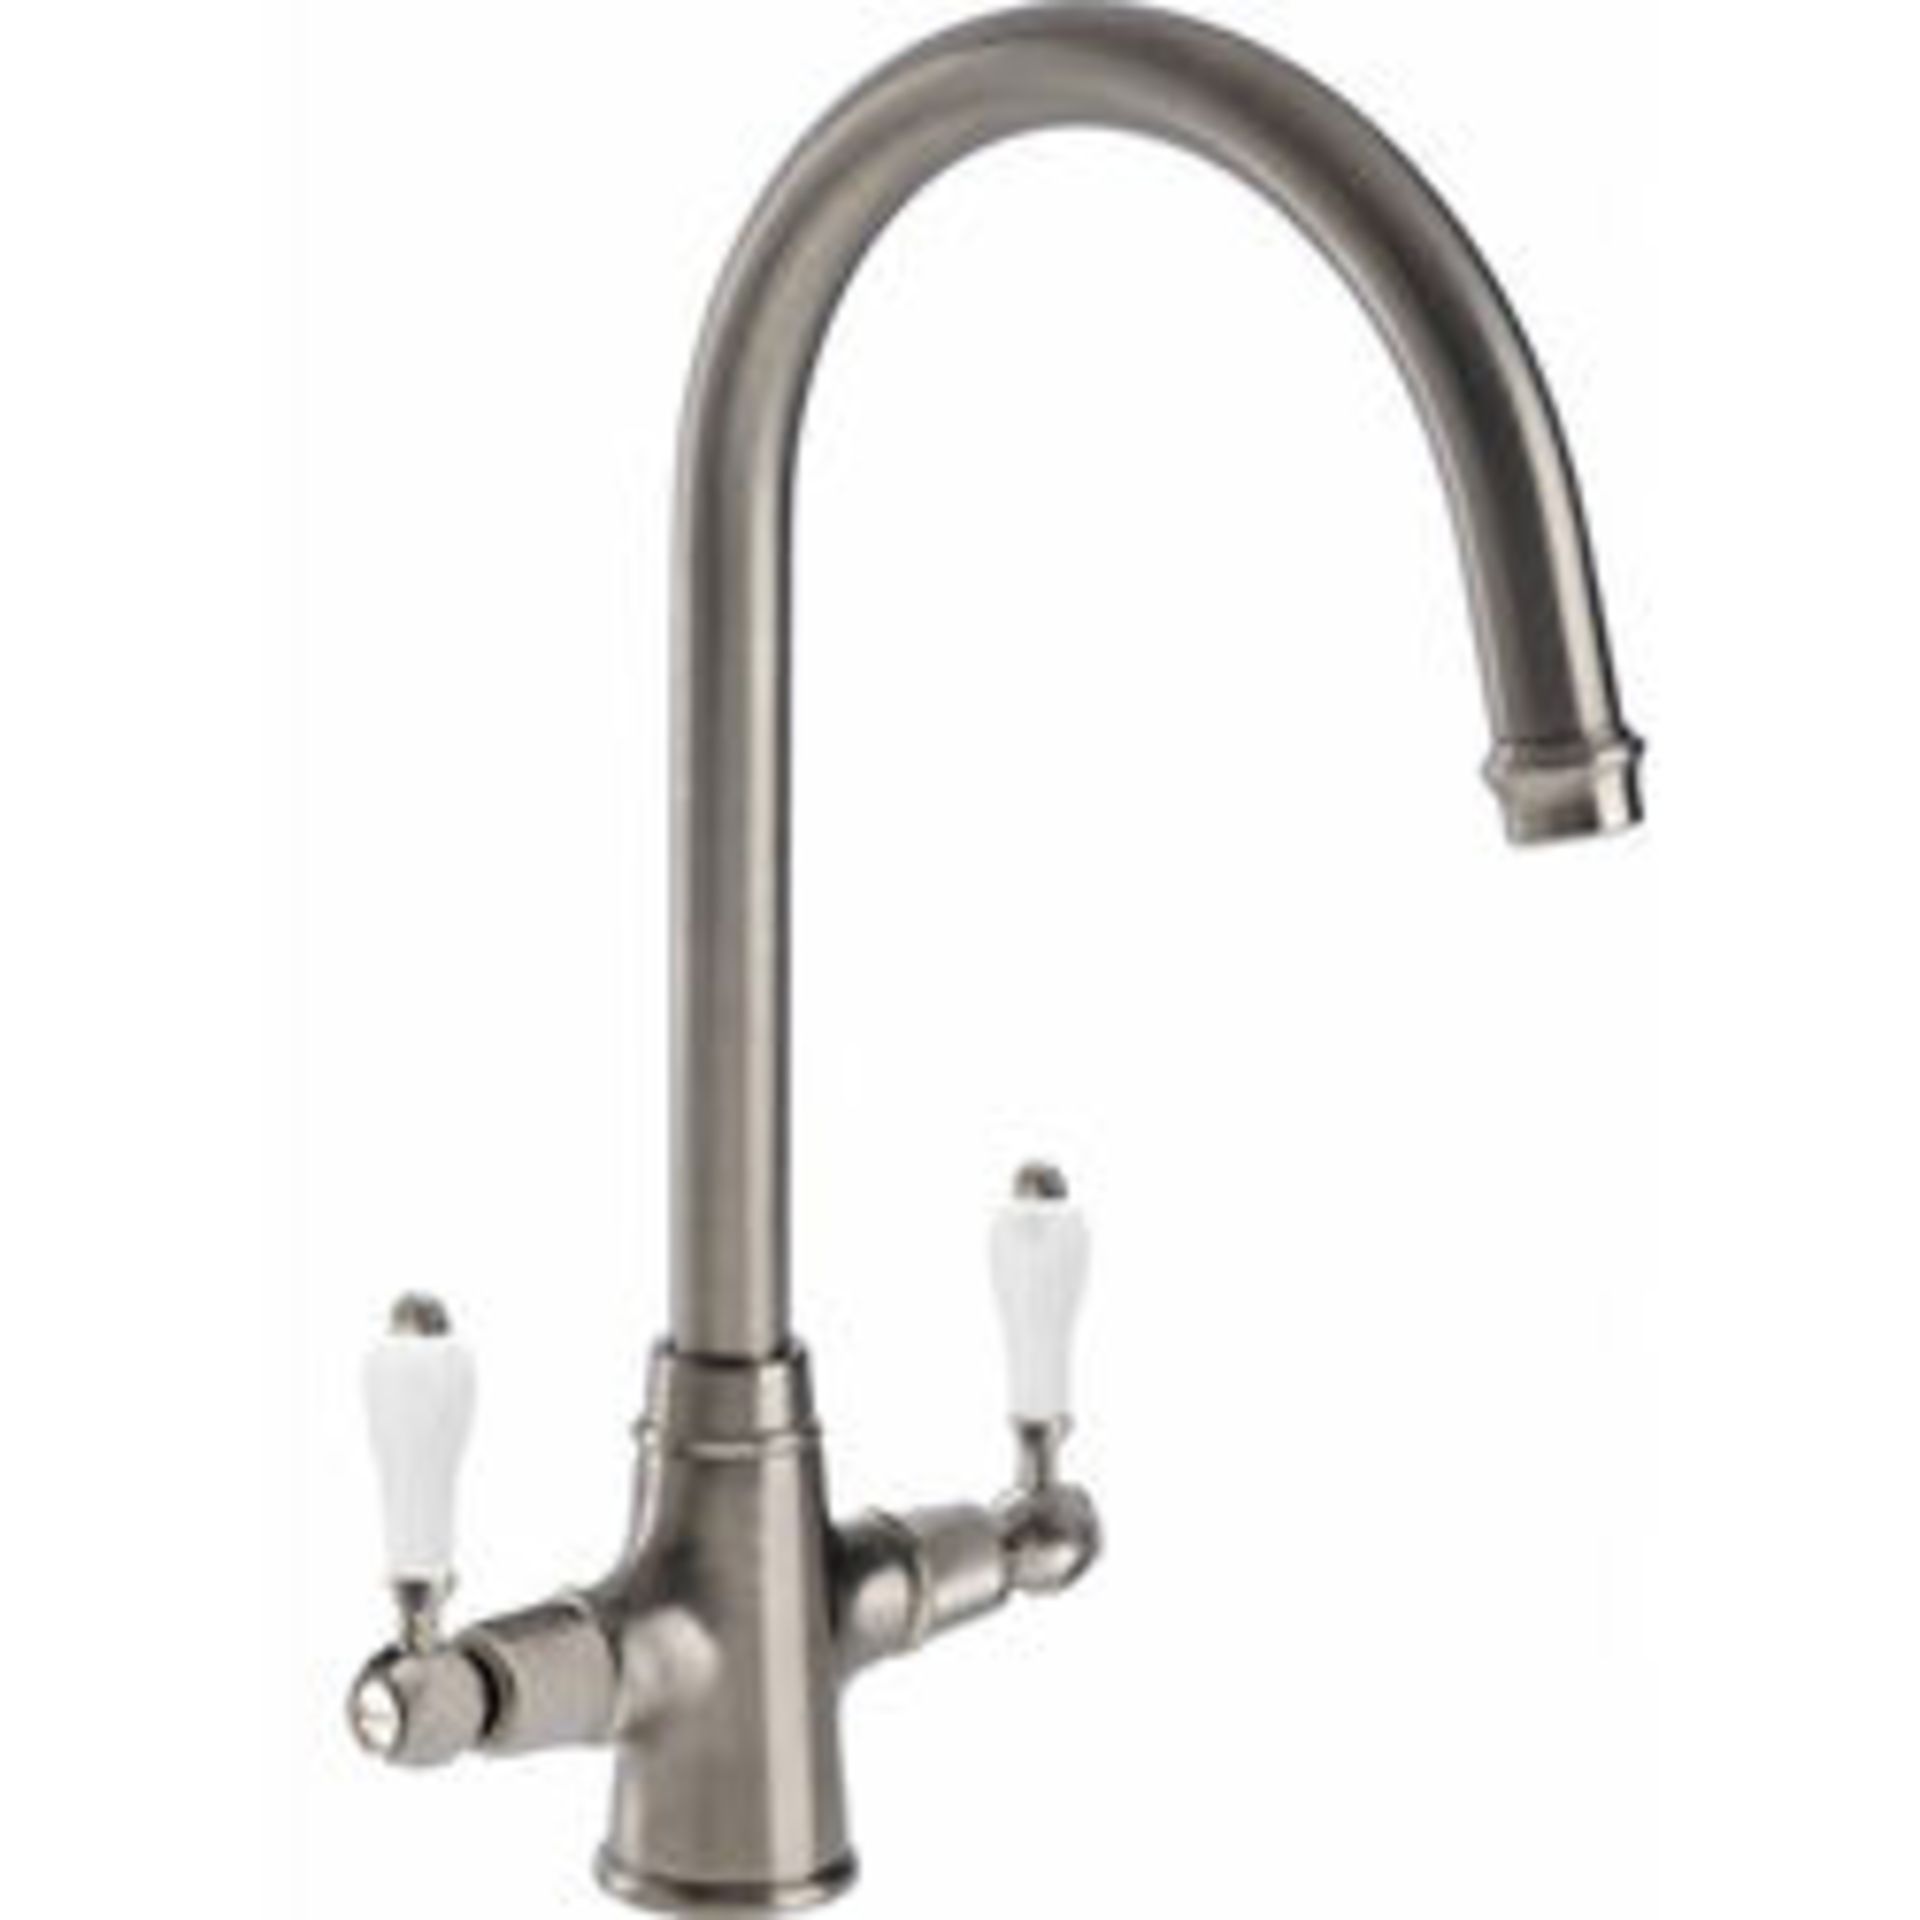 New (Y180) Abode Ludlow Monobloc Kitchen Mixer Tap Brushed Nickel RRP £263.10 The Abode Ludlow...